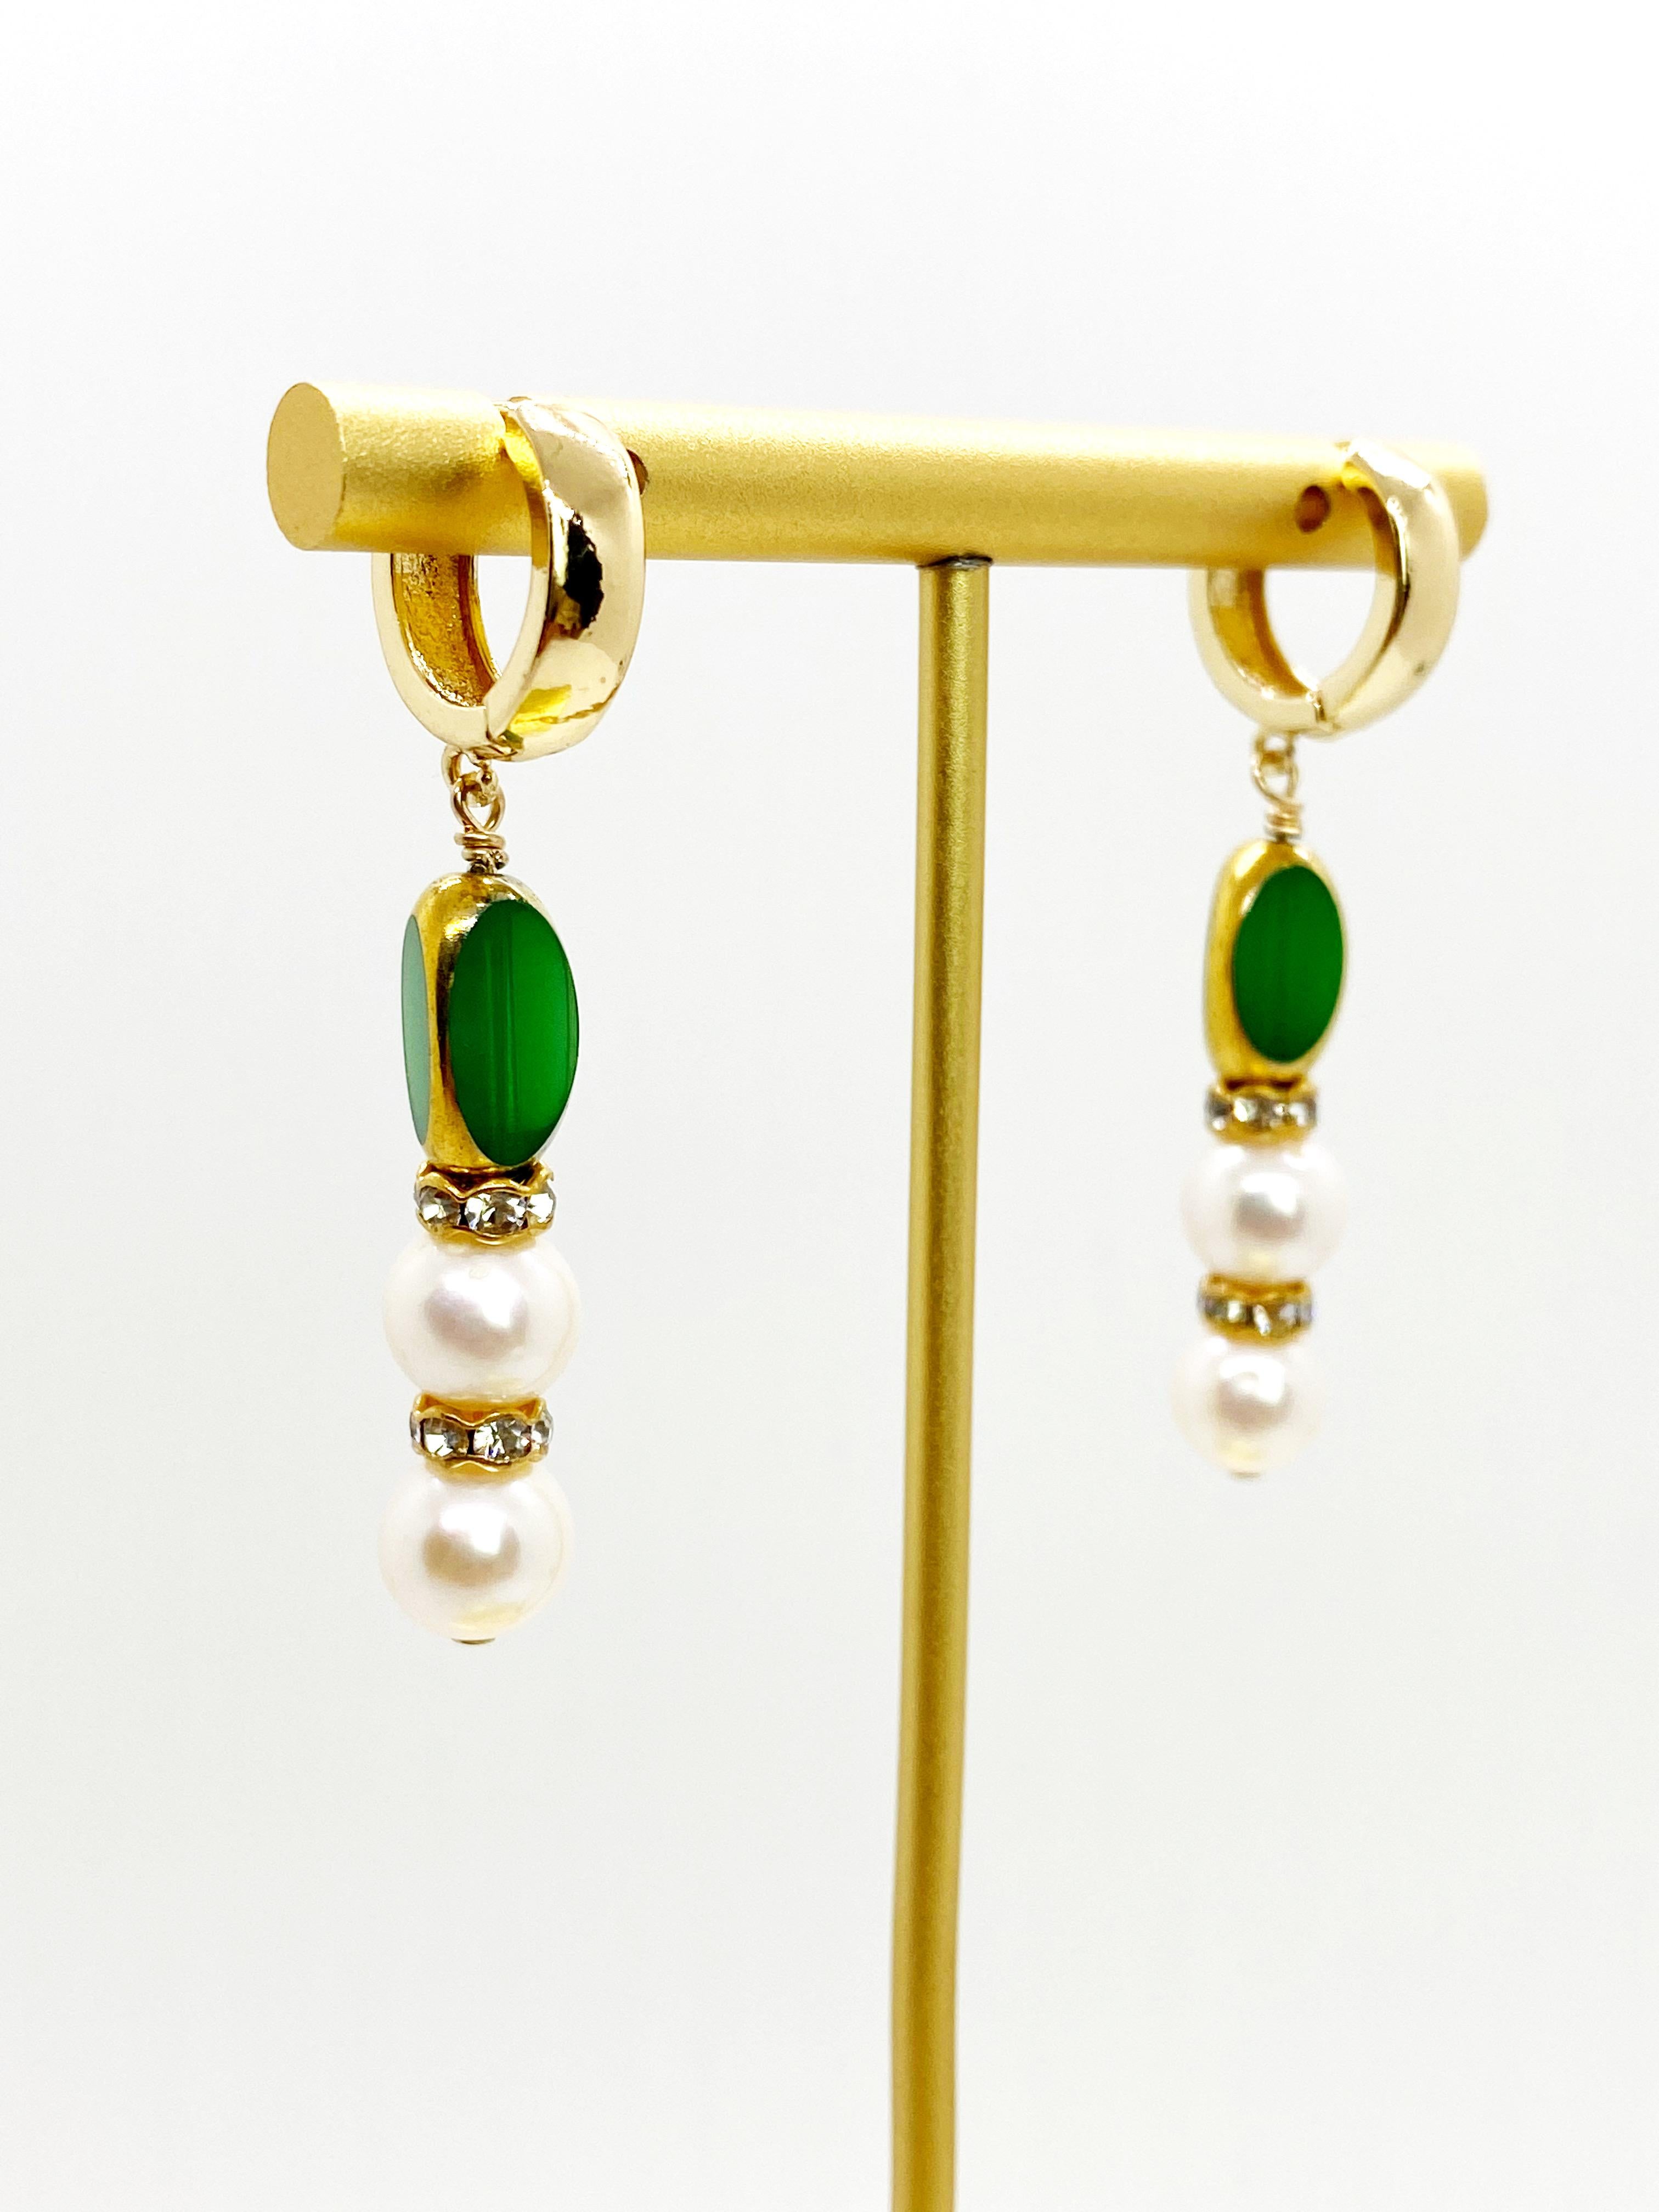 Contemporary Pearls & Matte Green Vintage German Glass Beads edged with 24K gold Earrings For Sale